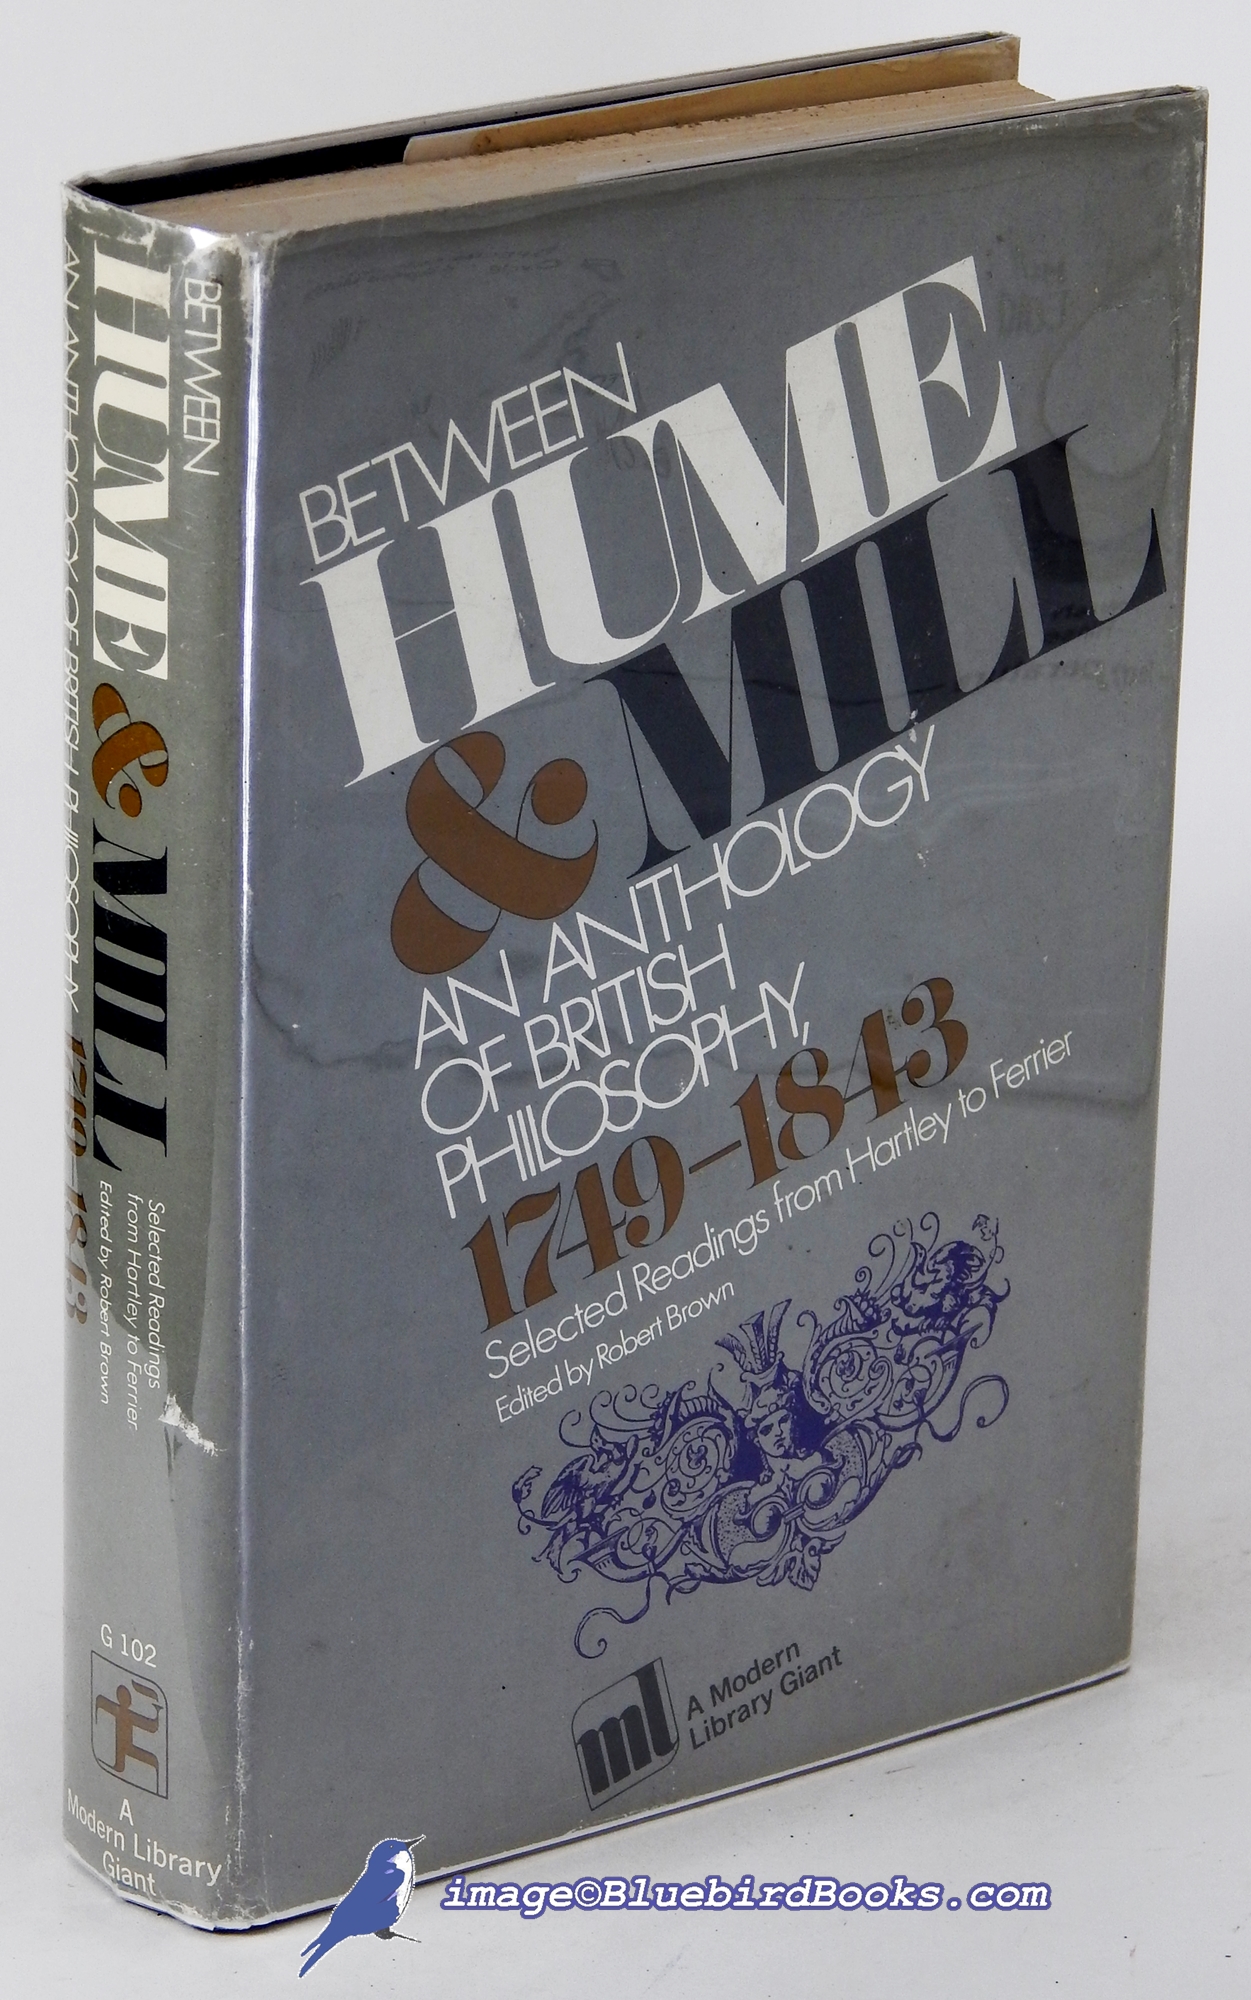 BROWN, ROBERT (EDITOR) - Between Hume and MILL: An Anthology of British Philosophy, 1749-1843; Selected Readings from Hartley to Ferrier (Modern Library Giant #99. 1)